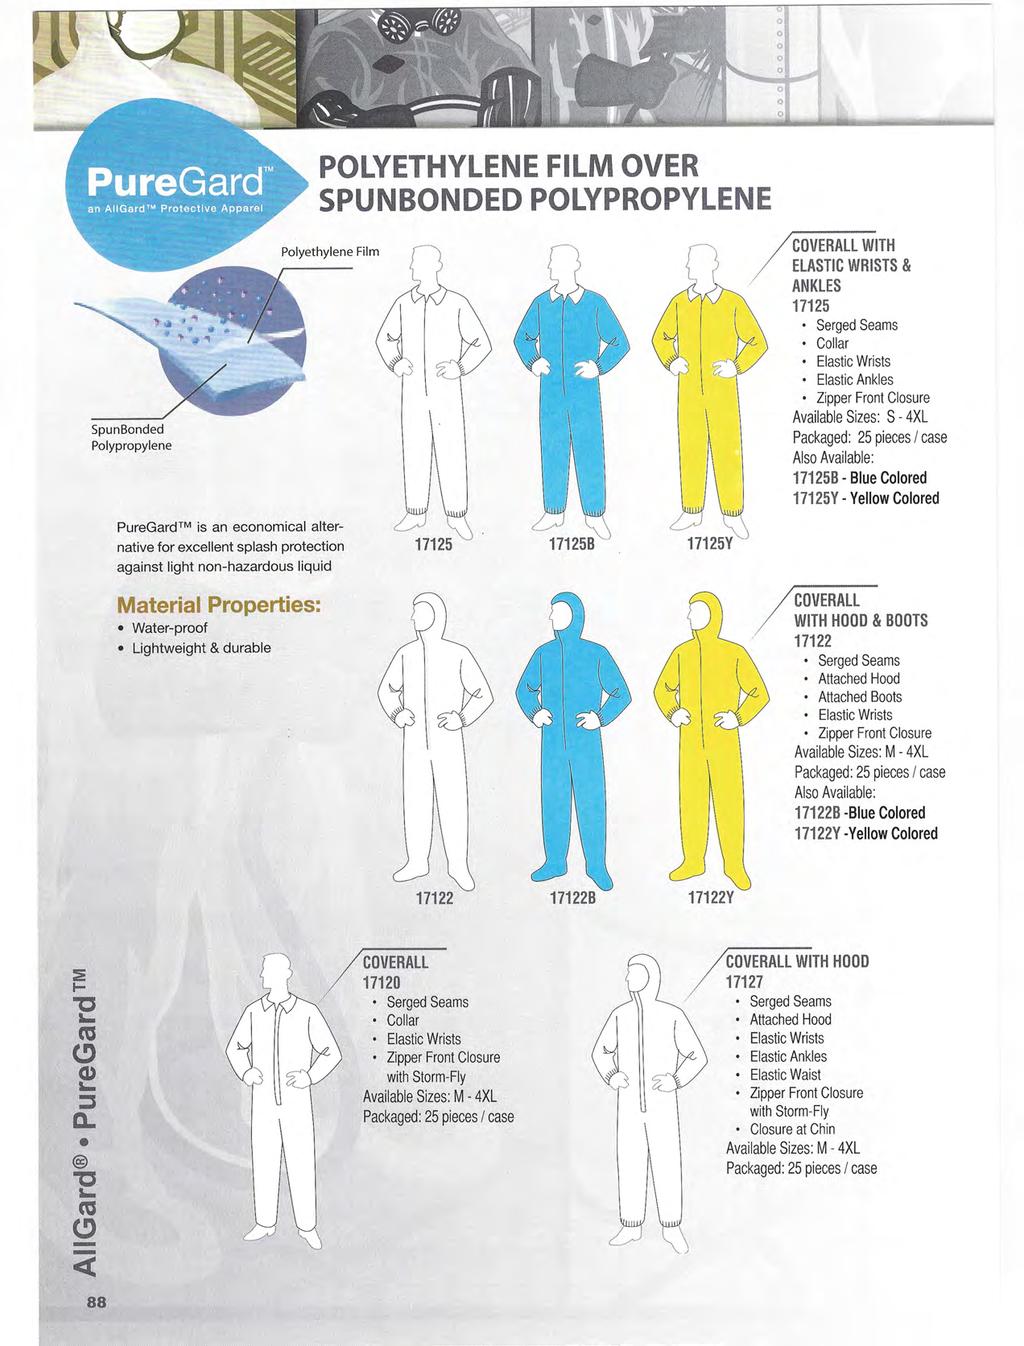 POLYETHYLENE FILM OVER SPUNBONDED POLYPROPYLENE Spun Bonded Polypropylene COVERALL WITH ELASTIC WRISTS & ANKLES 17125 Serged Seams Collar Elastic Wrists Elastic Ankles Zipper Front Closure Available